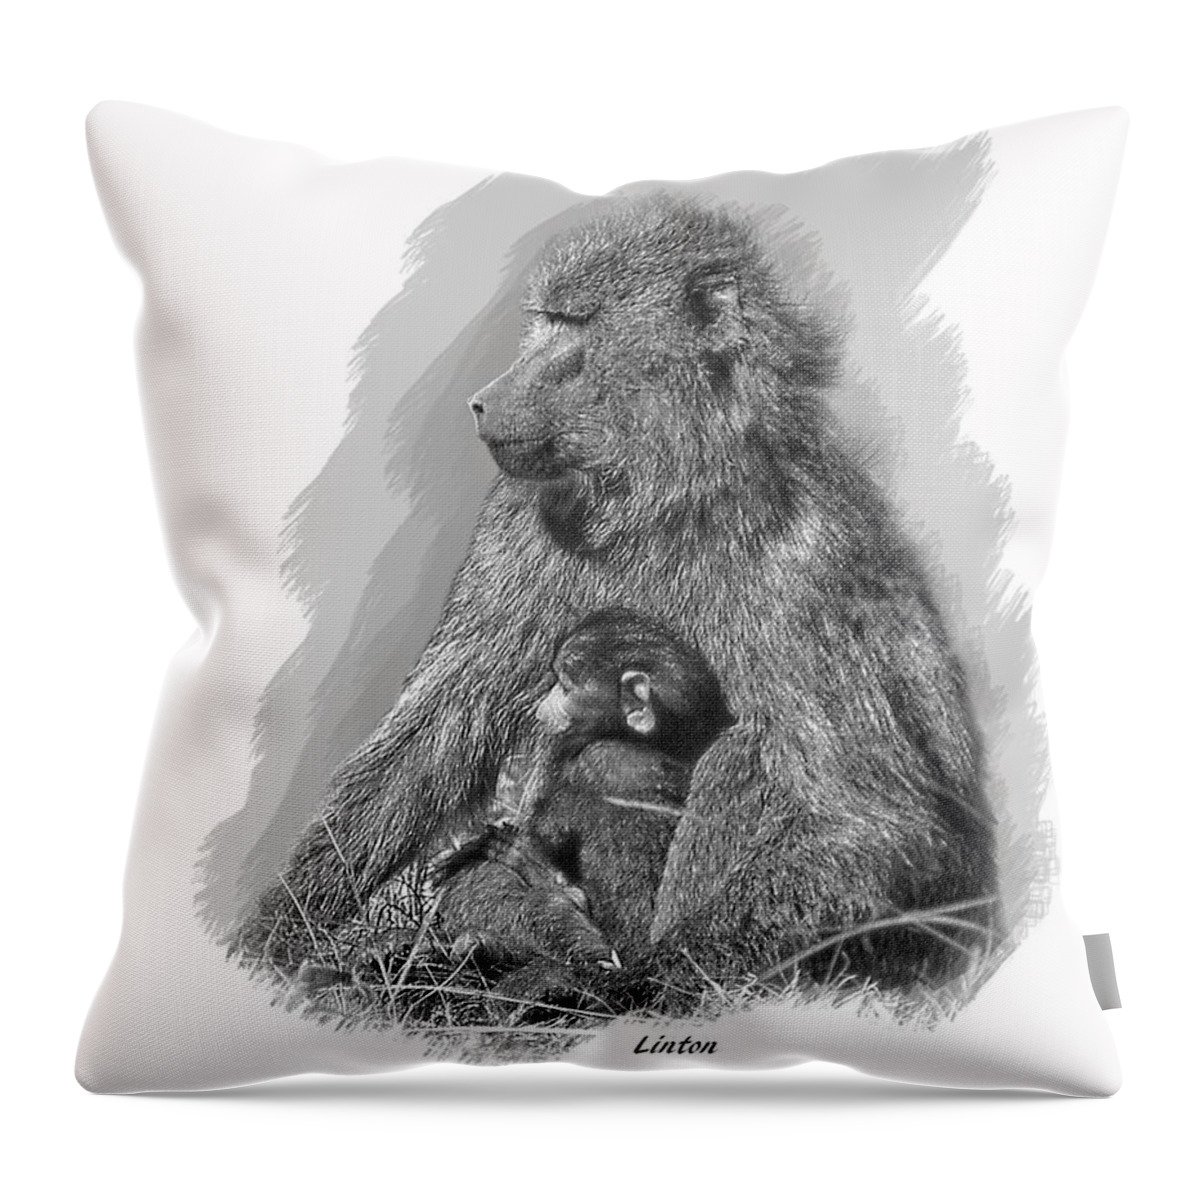 Baboon Throw Pillow featuring the digital art Baboon Mother And Young by Larry Linton